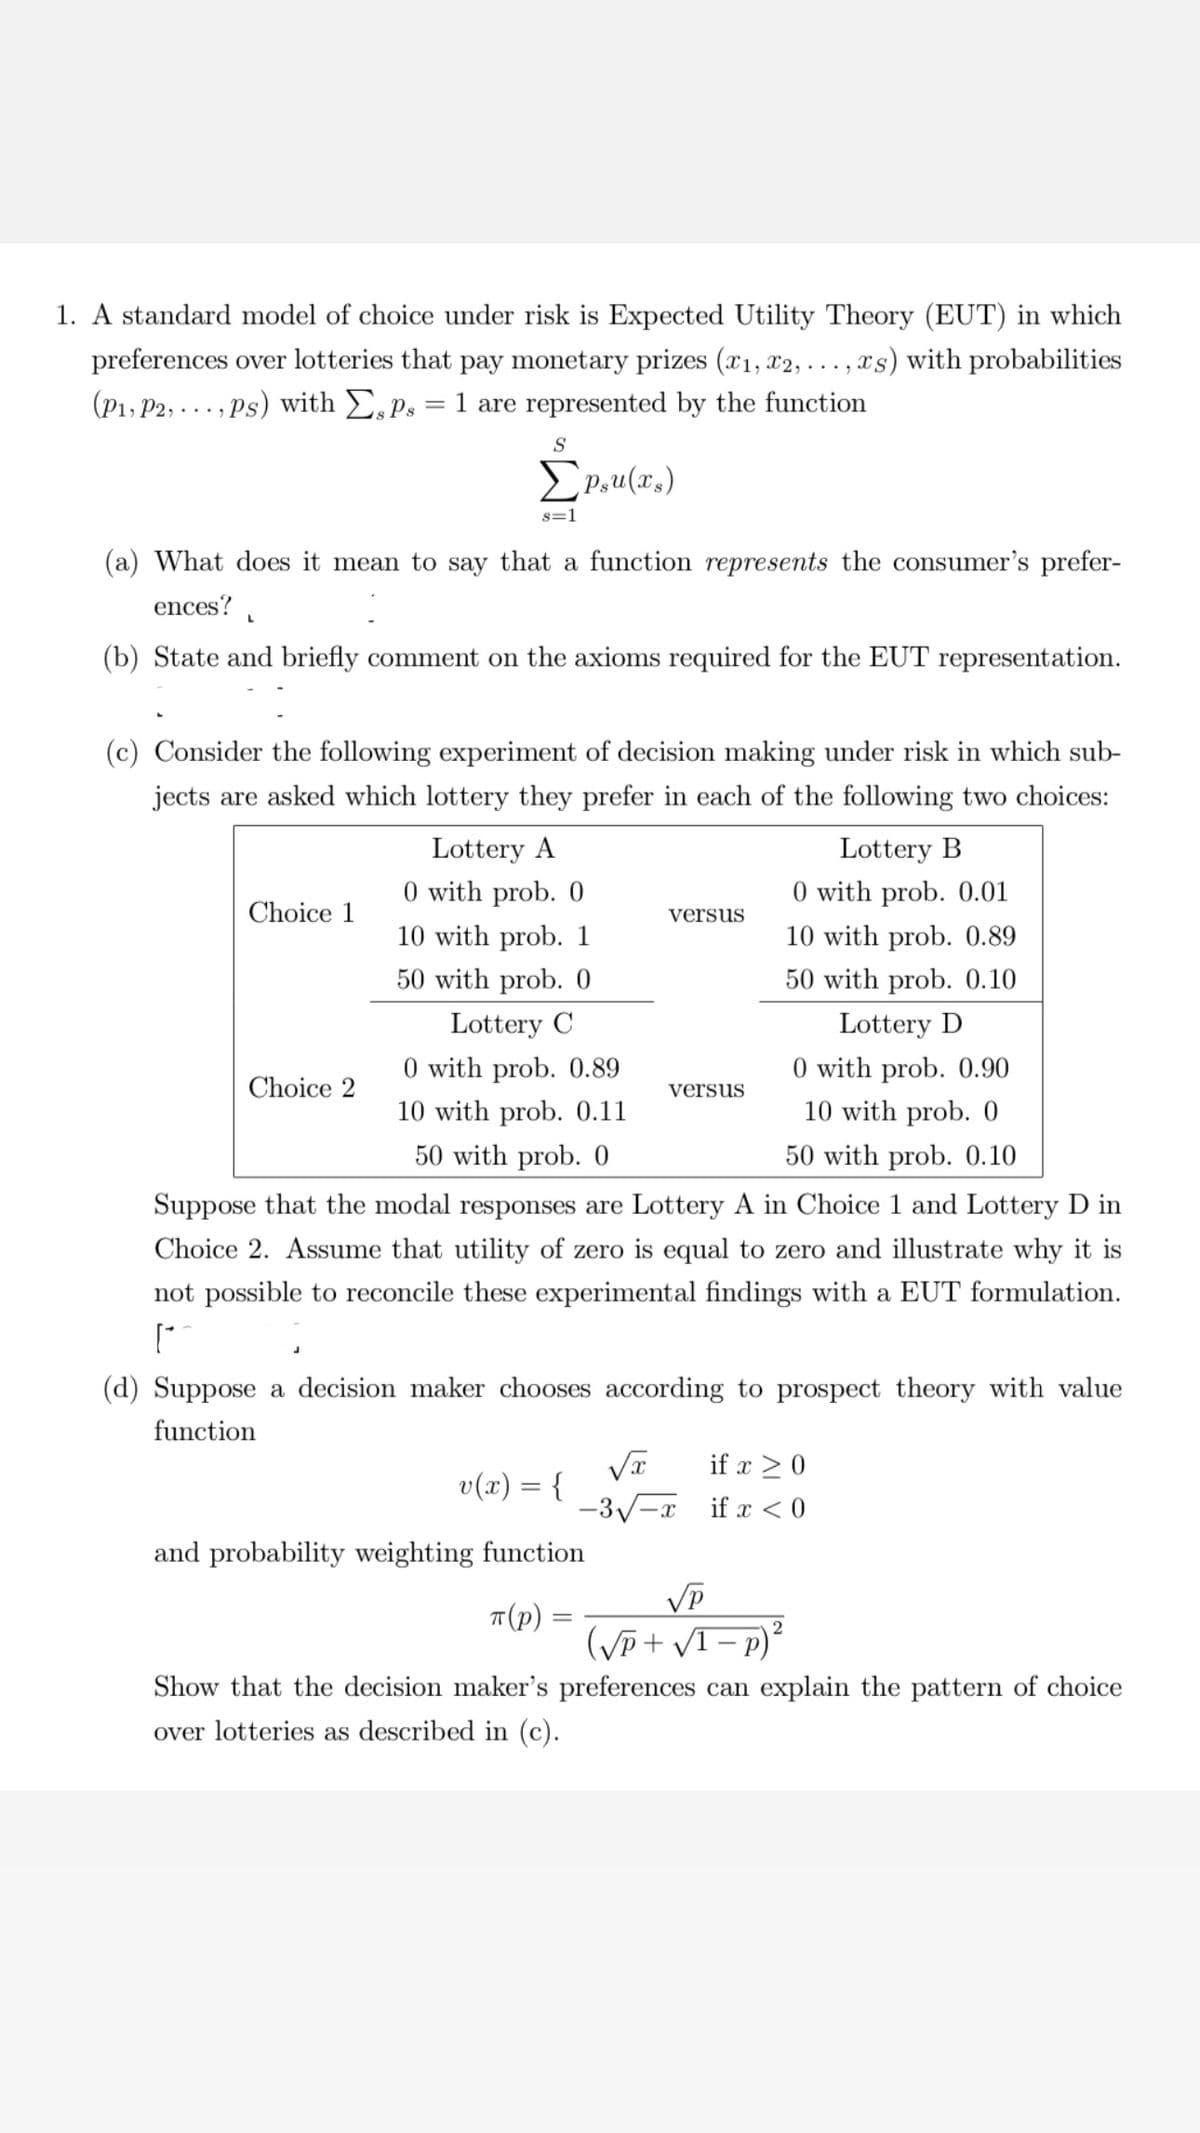 1. A standard model of choice under risk is Expected Utility Theory (EUT) in which
preferences over lotteries that pay monetary prizes (x₁, x2, ..., xs) with probabilities
(P1, P2, ..., Ps) with Eps = 1 are represented by the function
L
S
(a) What does it mean to say that a function represents the consumer's prefer-
ences?
Σpsu(xs)
Choice 1
8=1
(b) State and briefly comment on the axioms required for the EUT representation.
(c) Consider the following experiment of decision making under risk in which sub-
jects are asked which lottery they prefer in each of the following two choices:
Lottery B
0 with prob. 0.01
10 with prob. 0.89
50 with prob. 0.10
Lottery D
Choice 2
Lottery A
0 with prob. 0
10 with prob. 1
50 with prob. 0
Lottery C
0 with prob. 0.90
10 with prob. 0
50 with prob. 0.10
Suppose that the modal responses are Lottery A in Choice 1 and Lottery D in
Choice 2. Assume that utility of zero is equal to zero and illustrate why it is
not possible to reconcile these experimental findings with a EUT formulation.
["
0 with prob. 0.89
10 with prob. 0.11
50 with prob. 0
versus
(d) Suppose a decision maker chooses according to prospect theory with value
function
v(x) = {
and probability weighting function
π(p)
=
versus
√x
-3√-x
if x ≥ 0
if x < 0
VP
(√P+√1-p)
2
Show that the decision maker's preferences can explain the pattern of choice
over lotteries as described in (c).